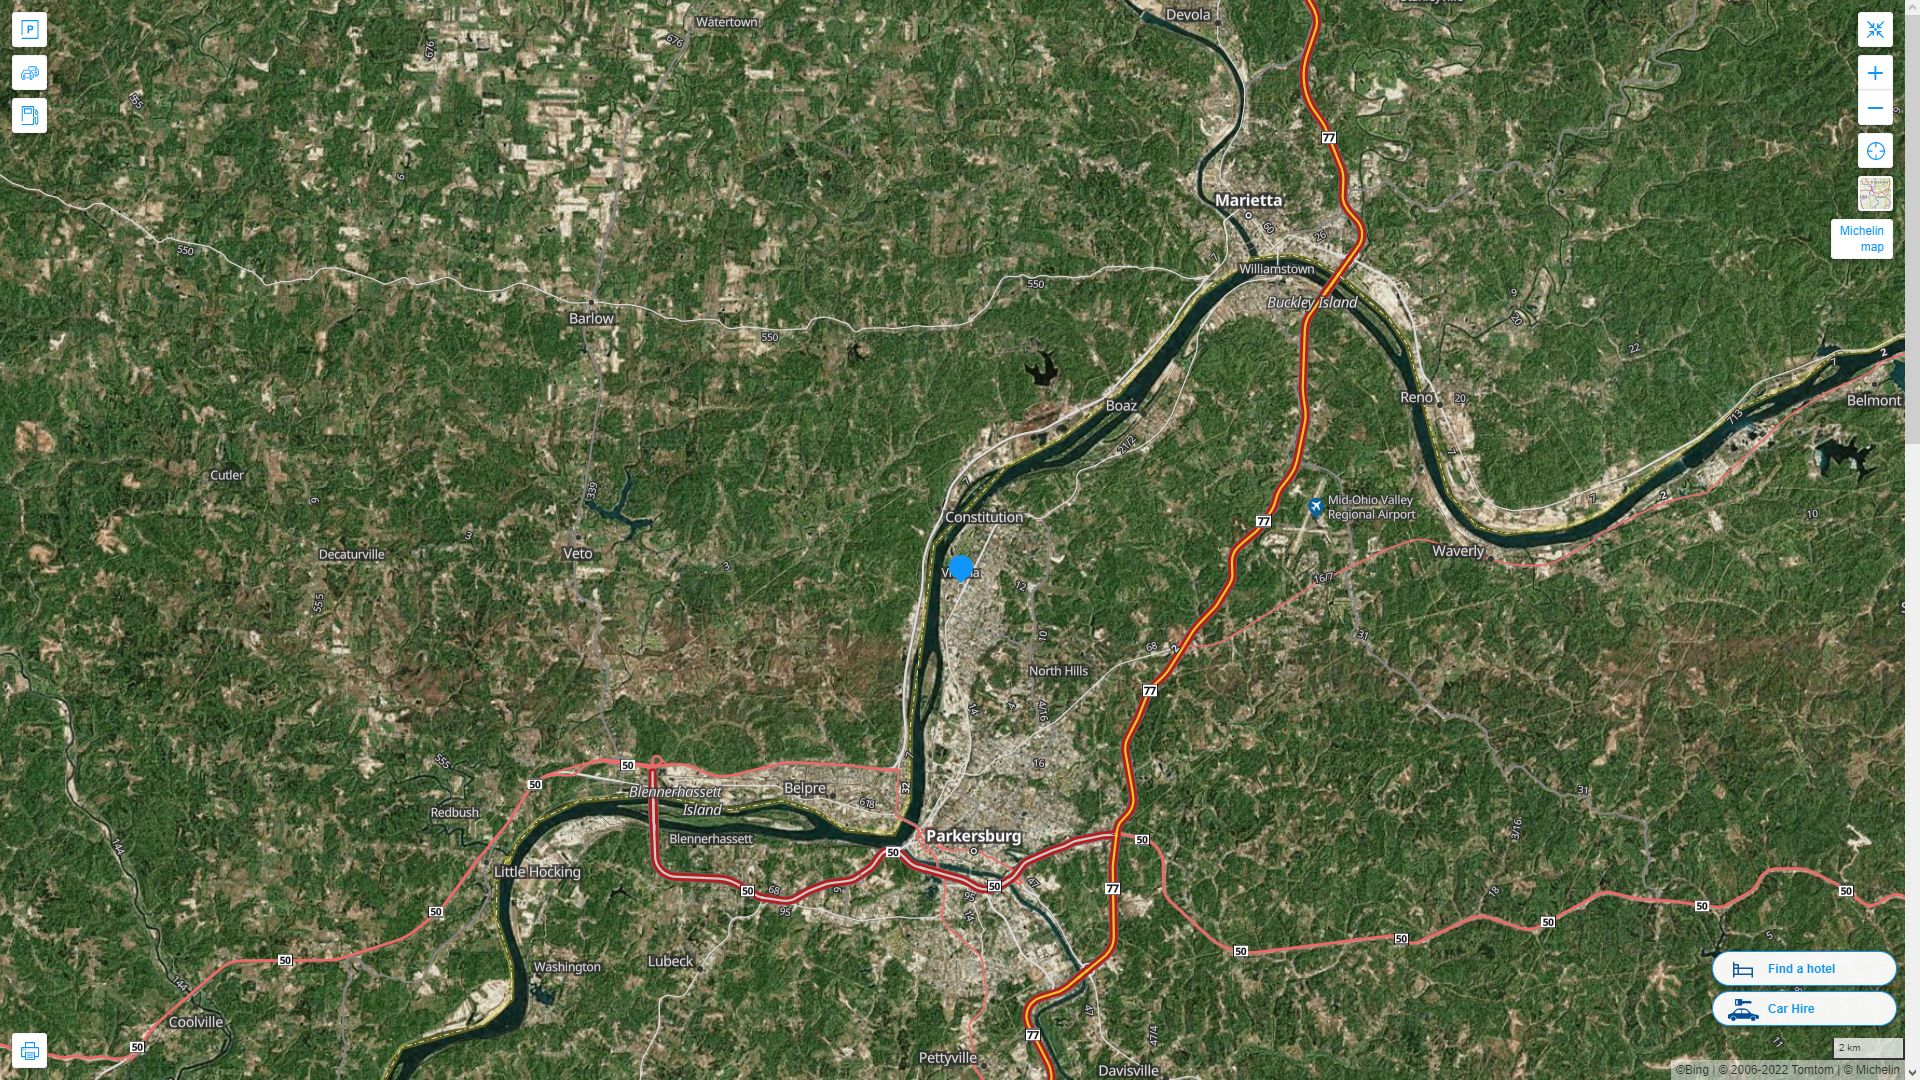 Vienna West Virginia Highway and Road Map with Satellite View